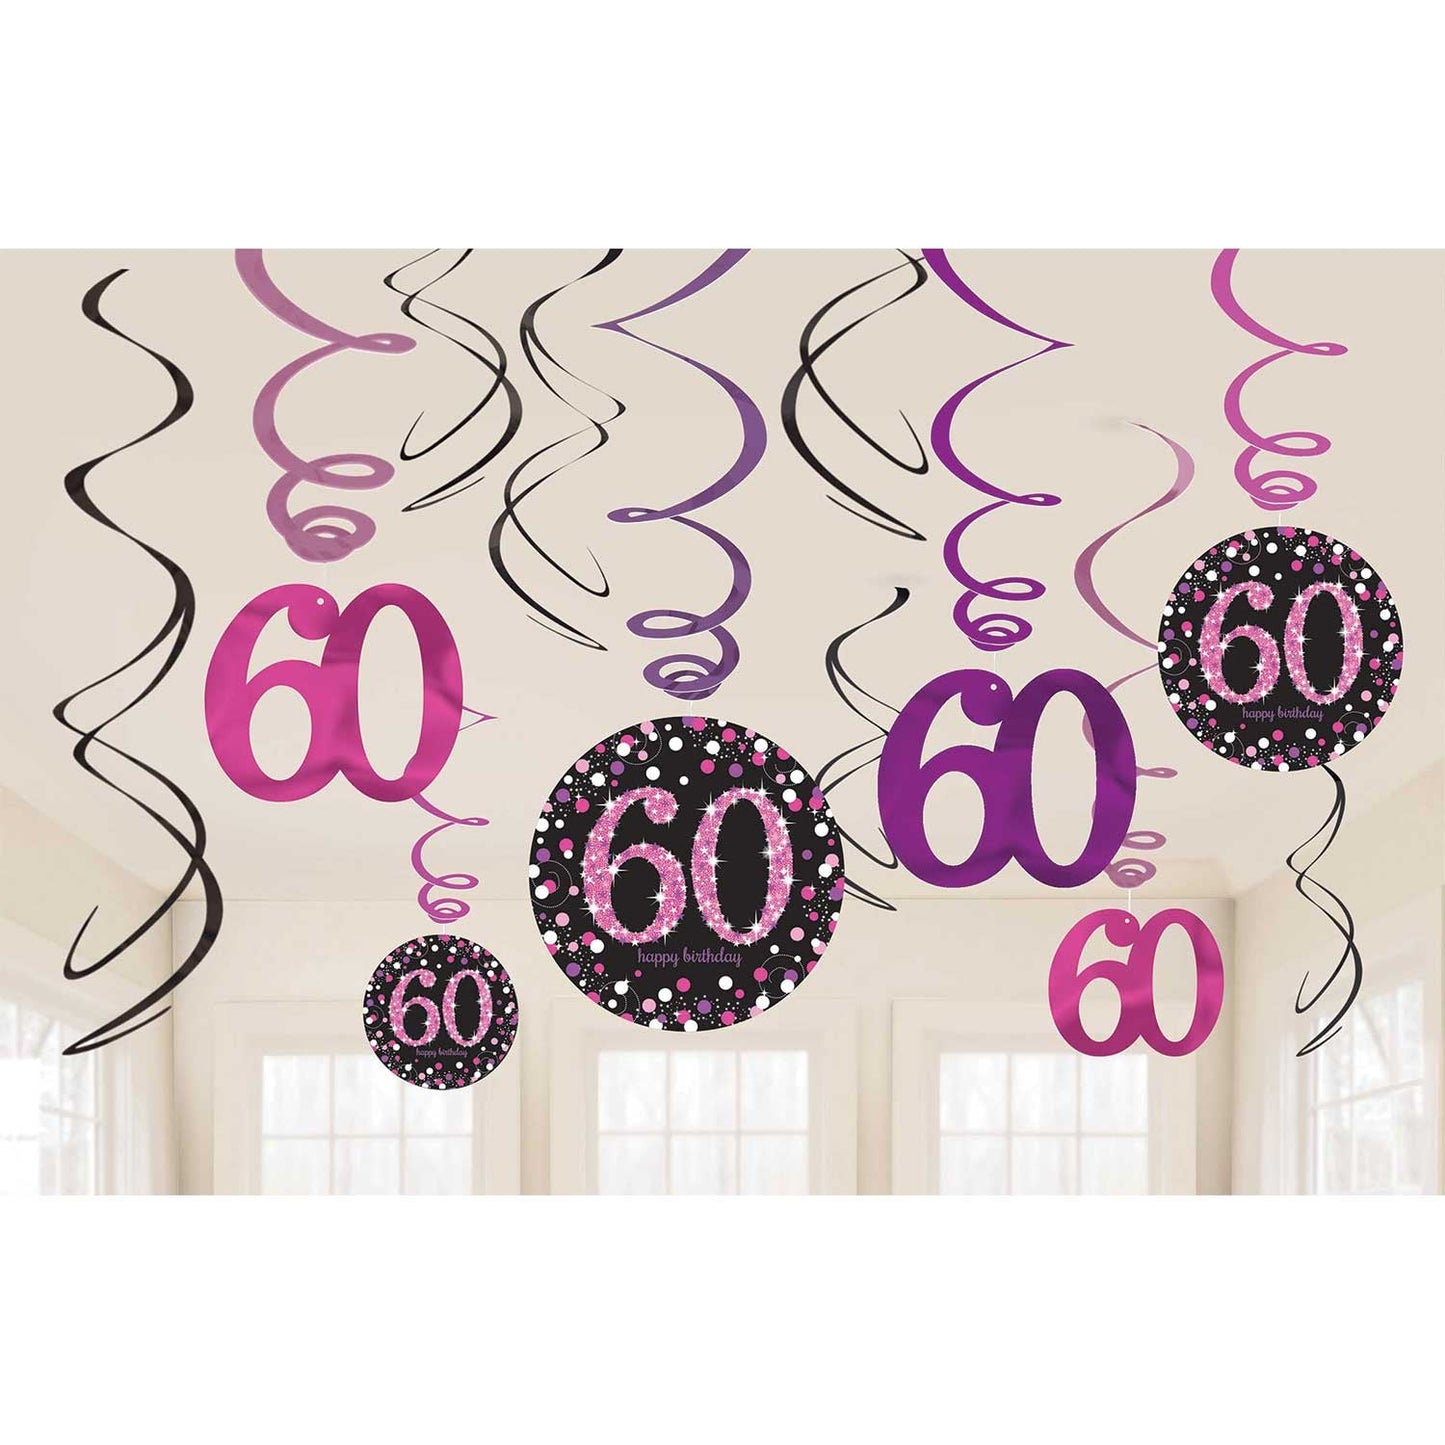 Pink Celebration 60th Swirl Decorations . Contains 6 Foil Swirls 45cm, 3 Swirls 60cm with Card Numbers, 3 Foil Swirls 60cm with Foil Numbers